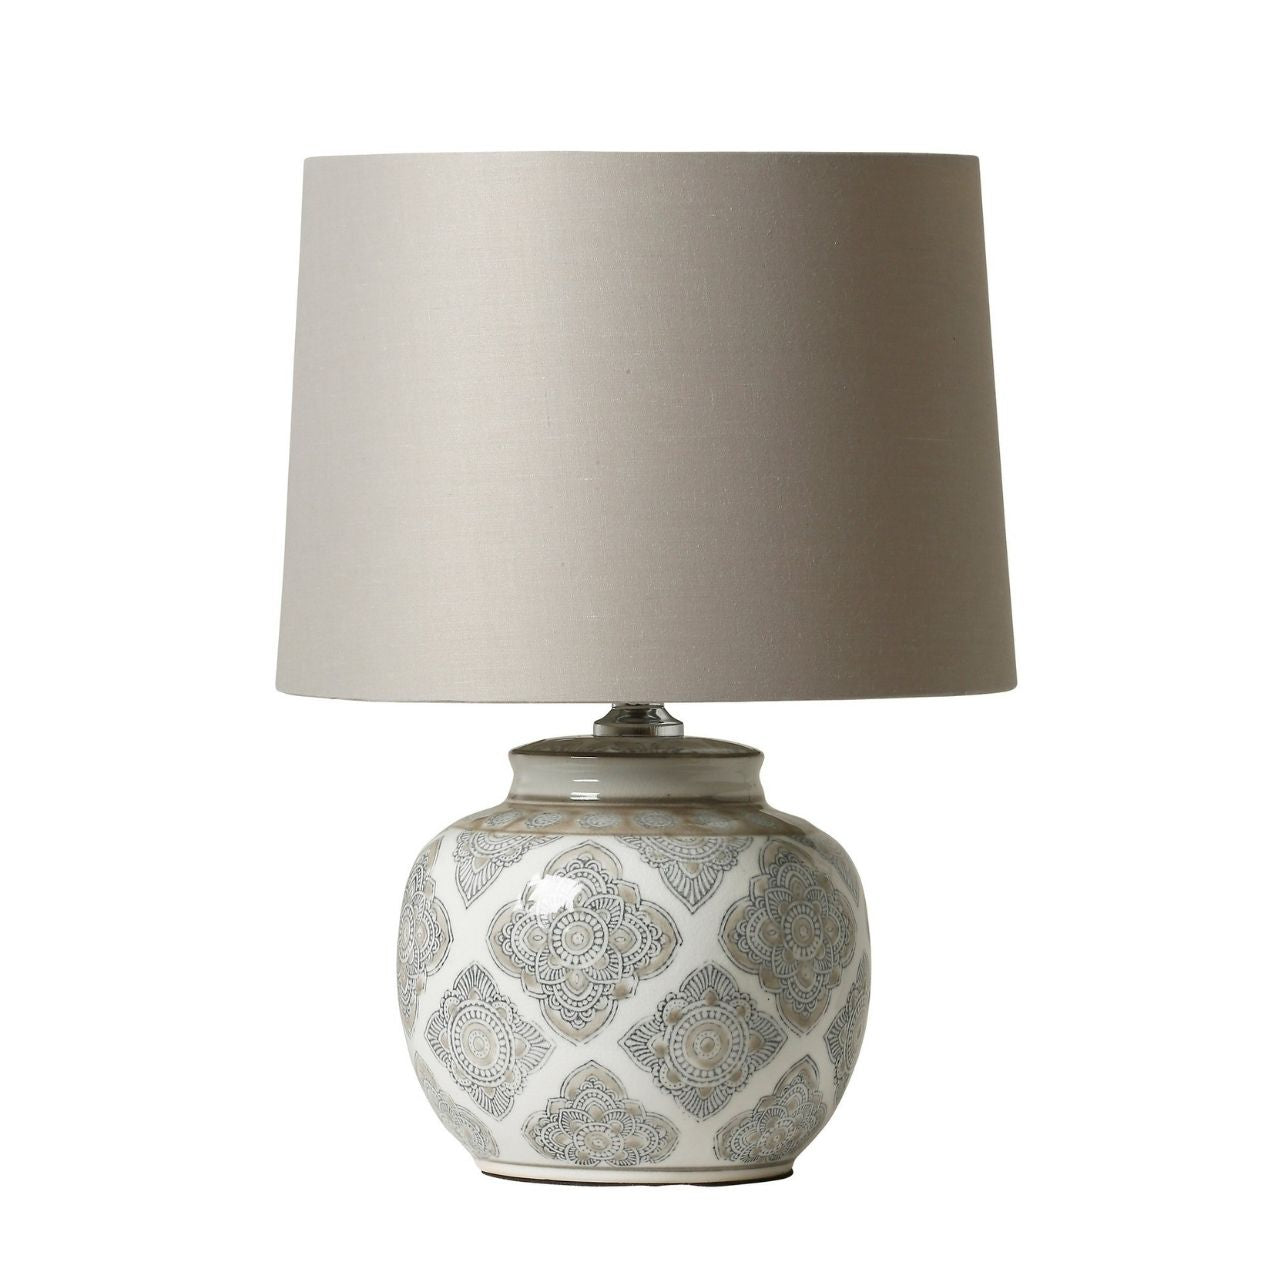 Mindy Brownes Interiors Ruby Lamp  Mindy Brownes ceramic lamp - Boho pattern in blue and grey. Taupe shade. Ideal as a bedside or for living space!